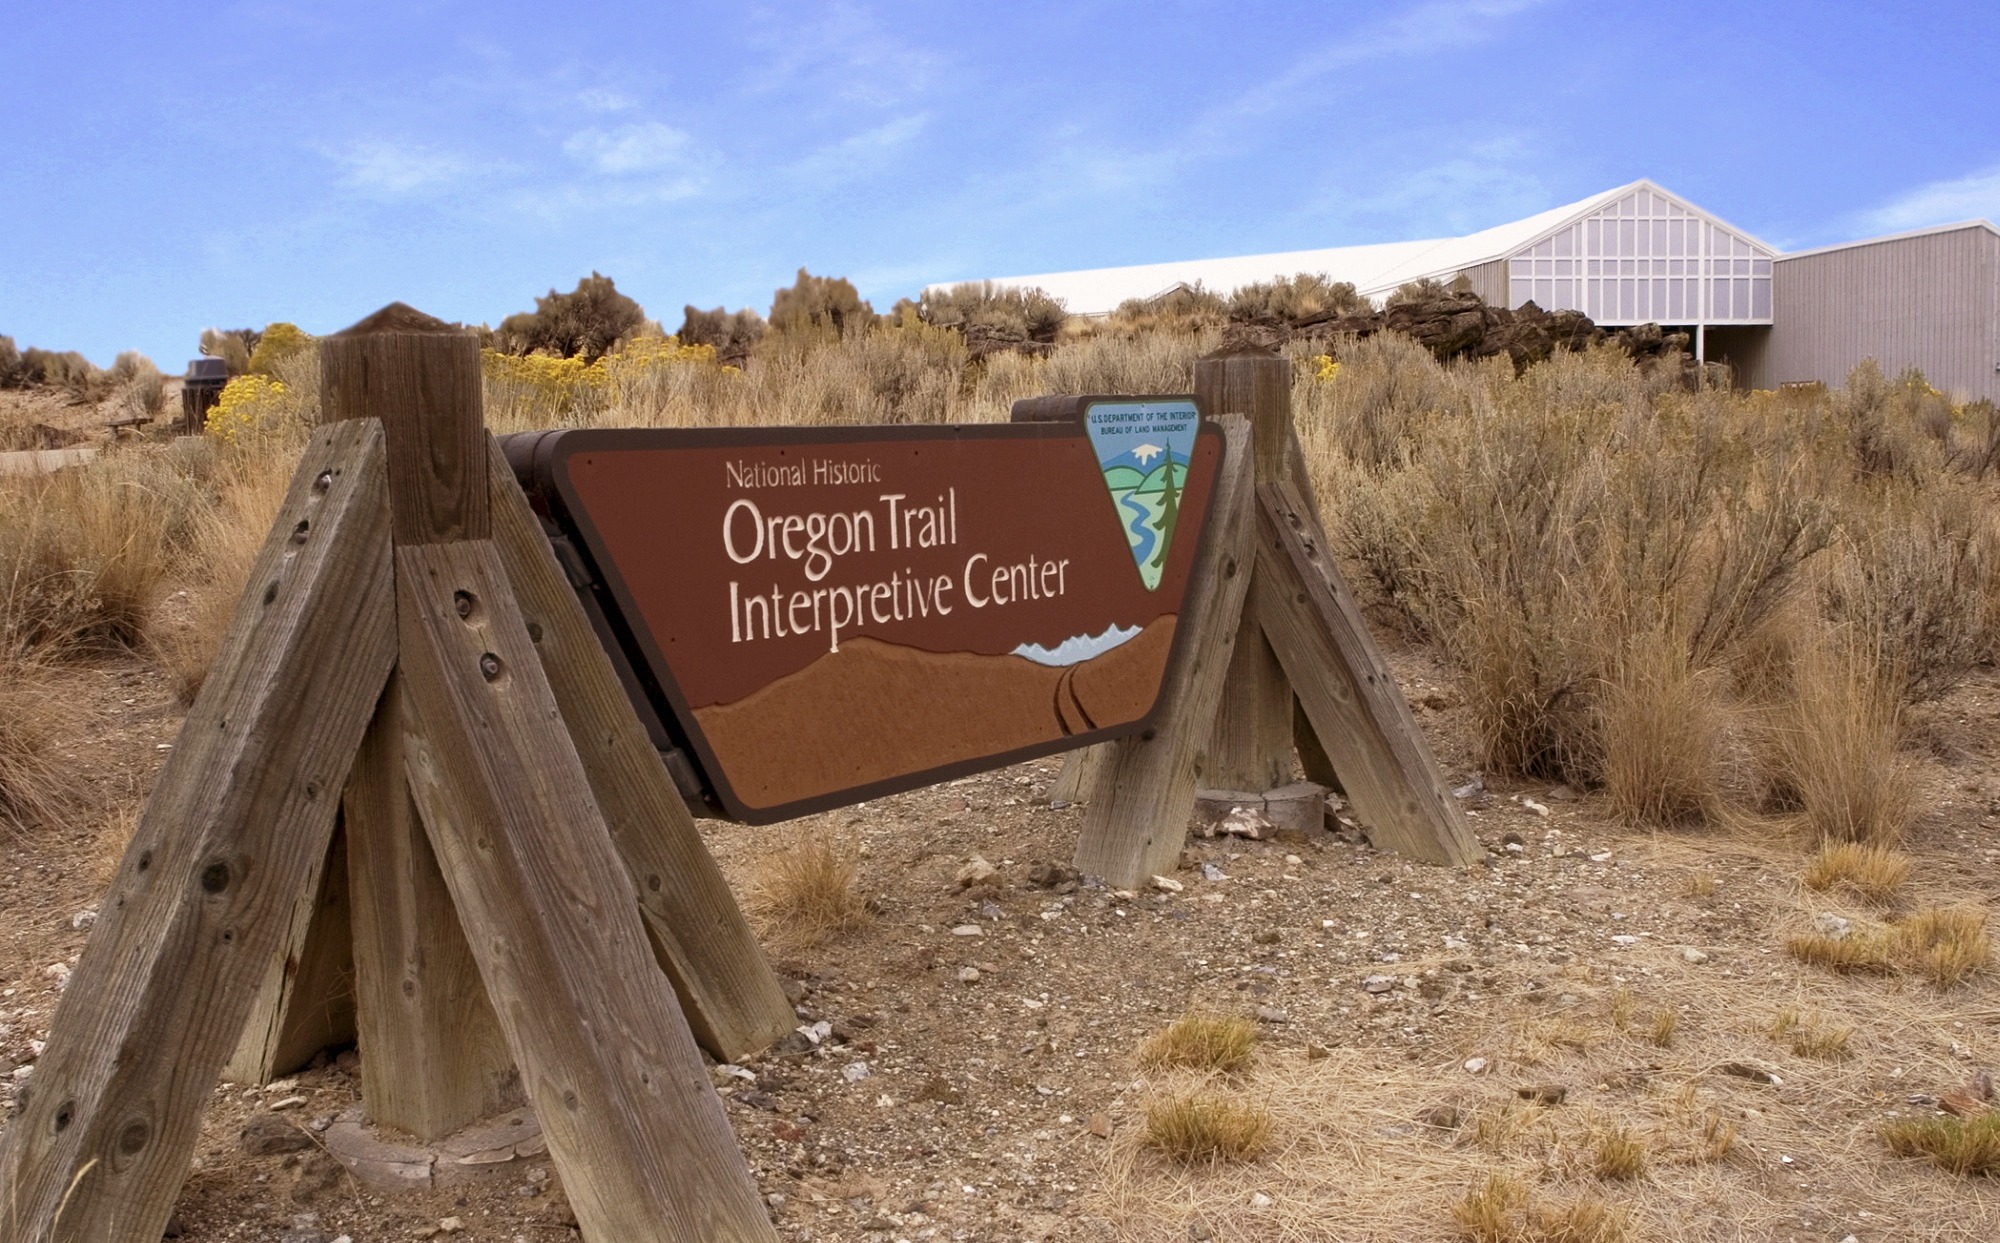 In the footsteps of the Oregon Trail pioneers